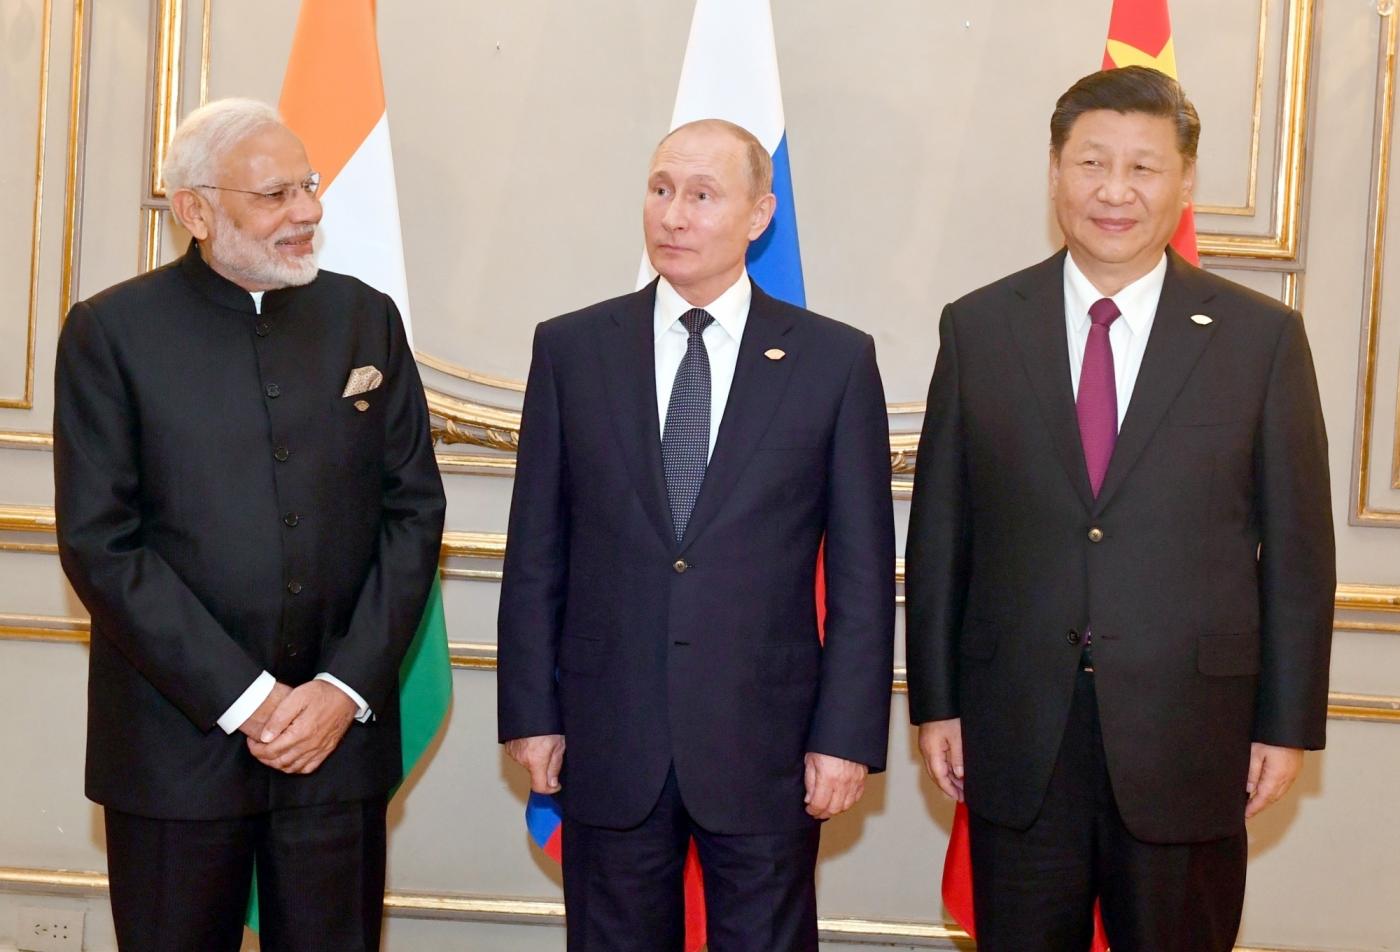 Buenos Aires: Prime Minister Narendra Modi, Russian President Vladimir Putin and Chinese President Xi Jinping at the RIC (Russia, India, China) Informal Summit, in Buenos Aires, Argentina on Nov 30, 2018. (Photo: IANS/PIB) by .